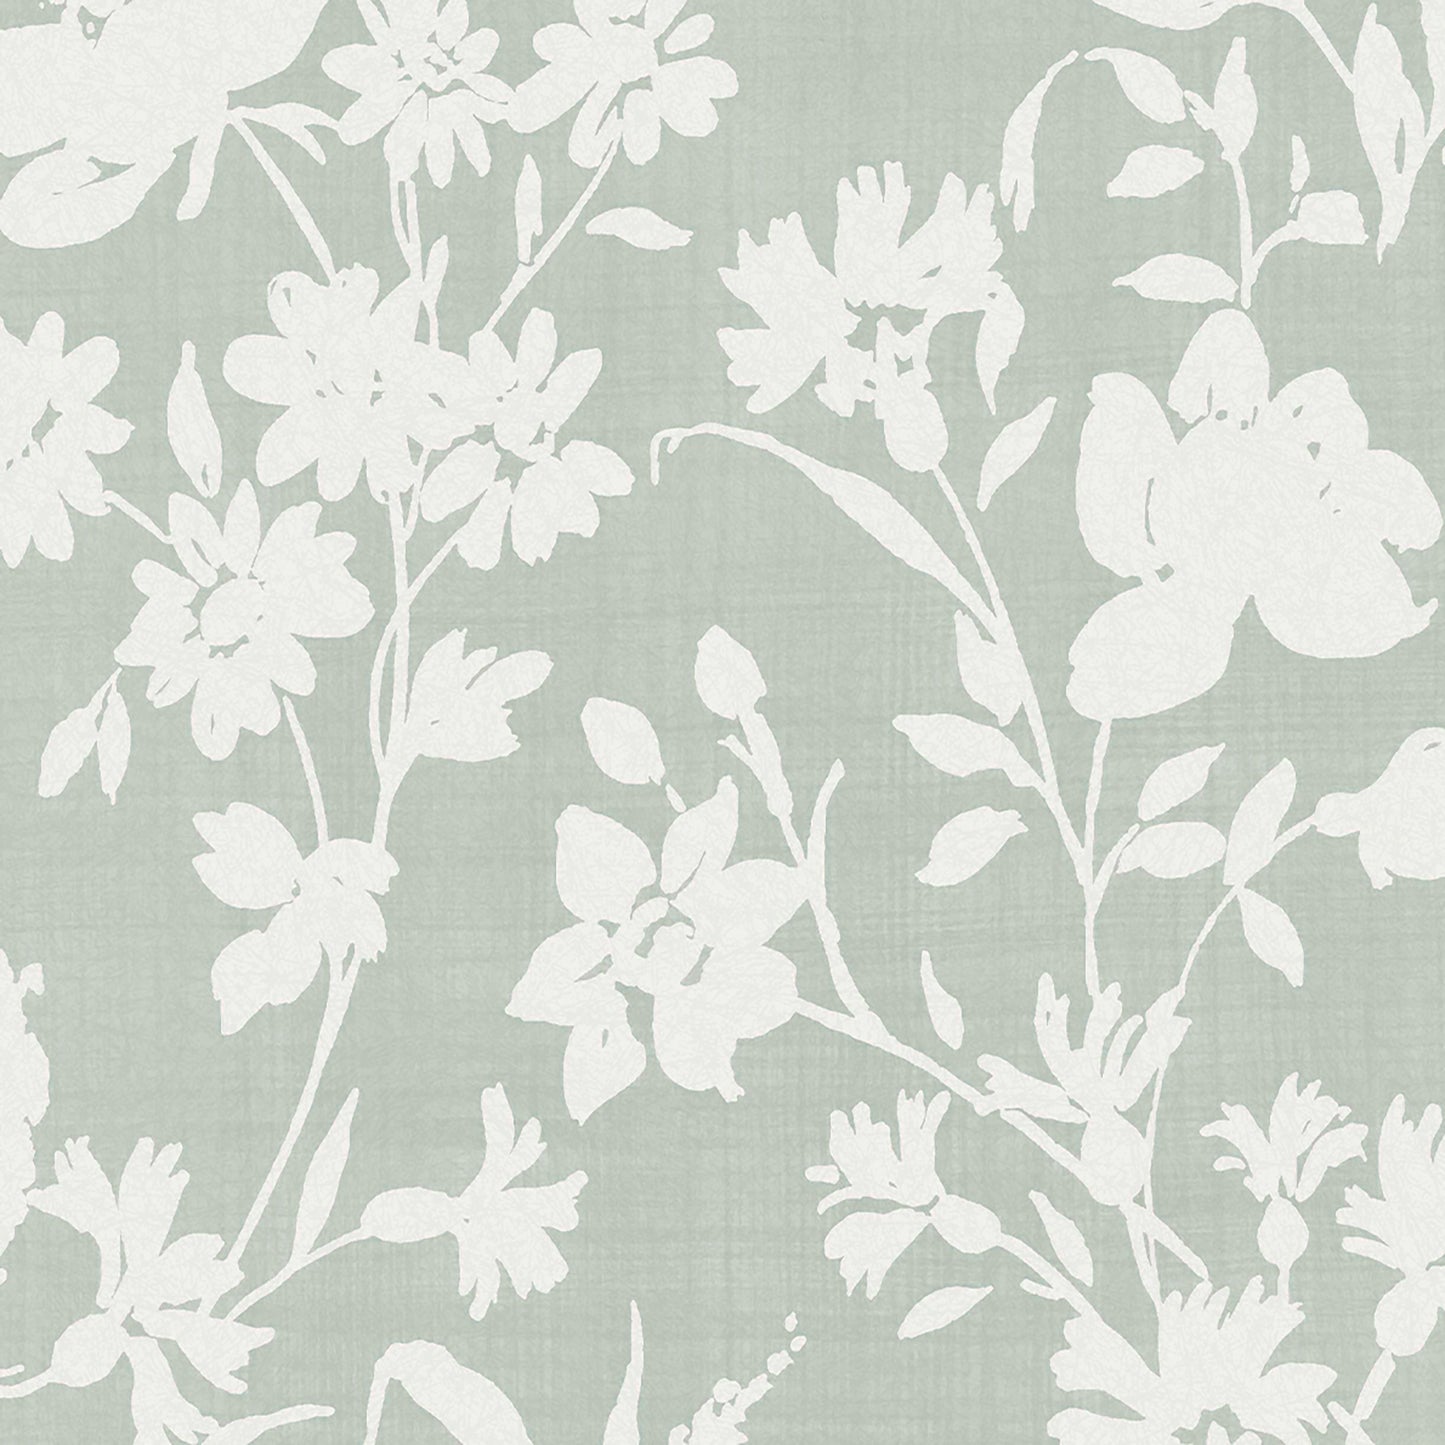 Purchase Laura Ashley Wallpaper Item# 119855 Rye Sage Green Removable